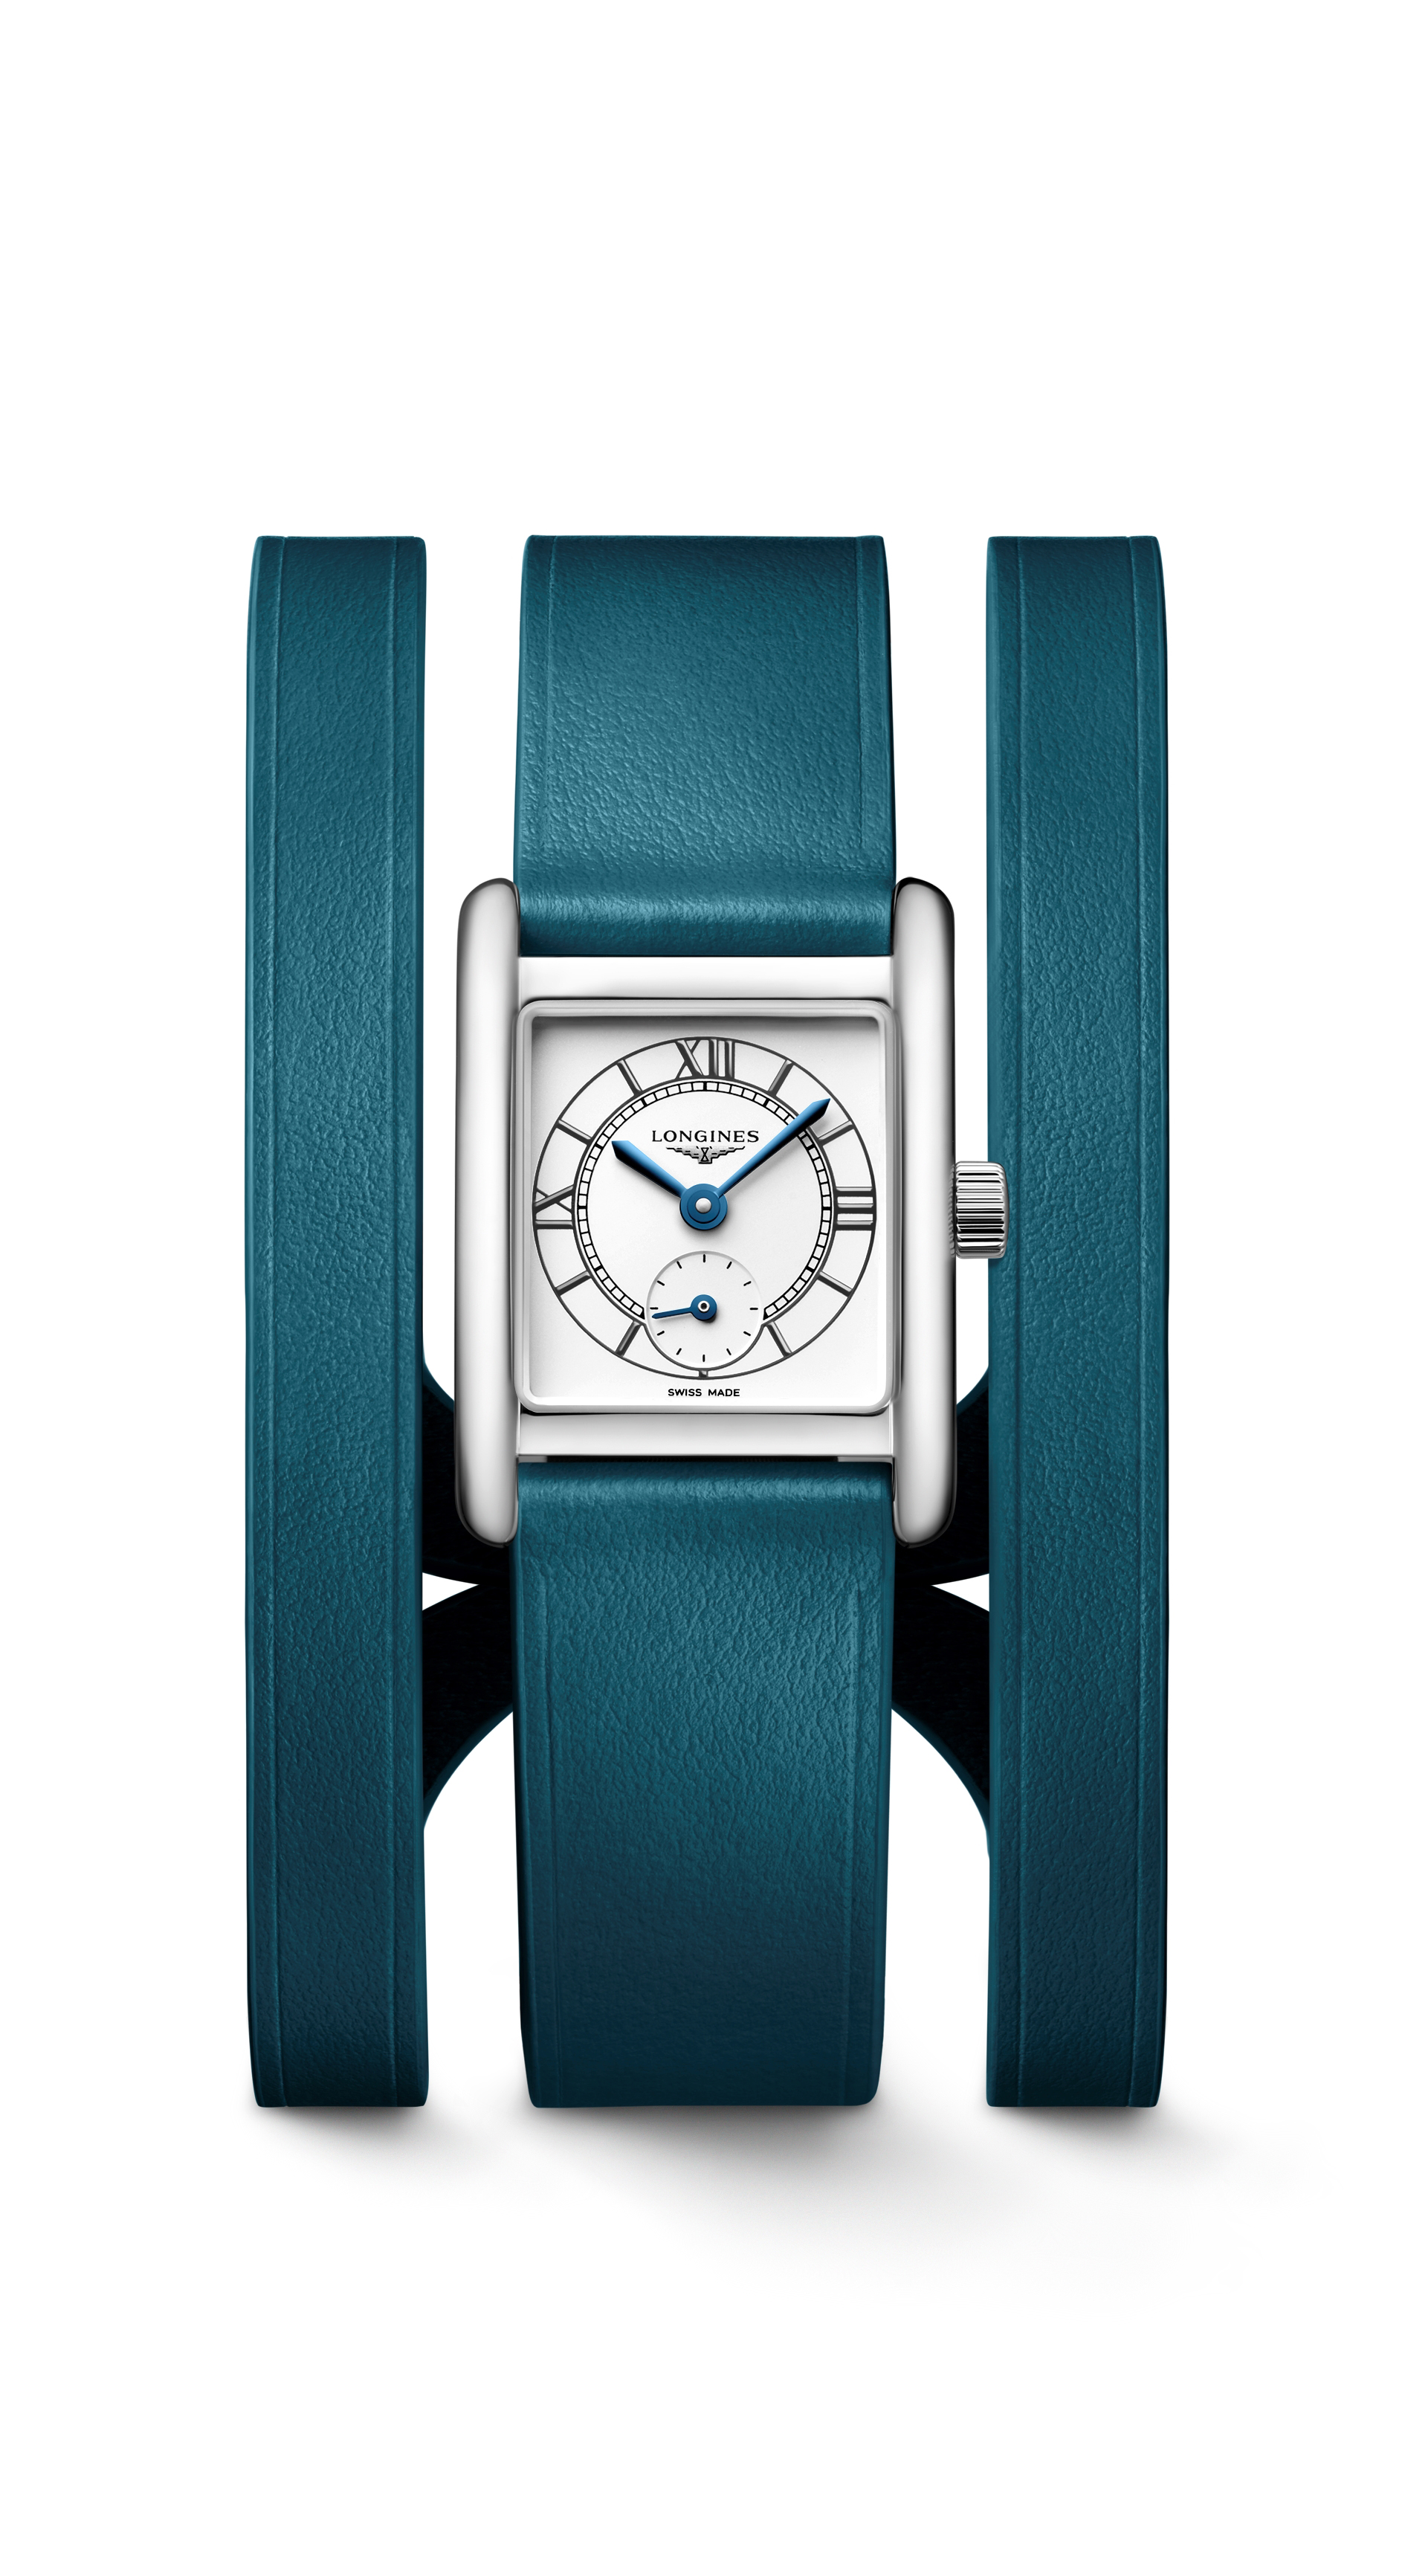 Longines teal green watch with double straps